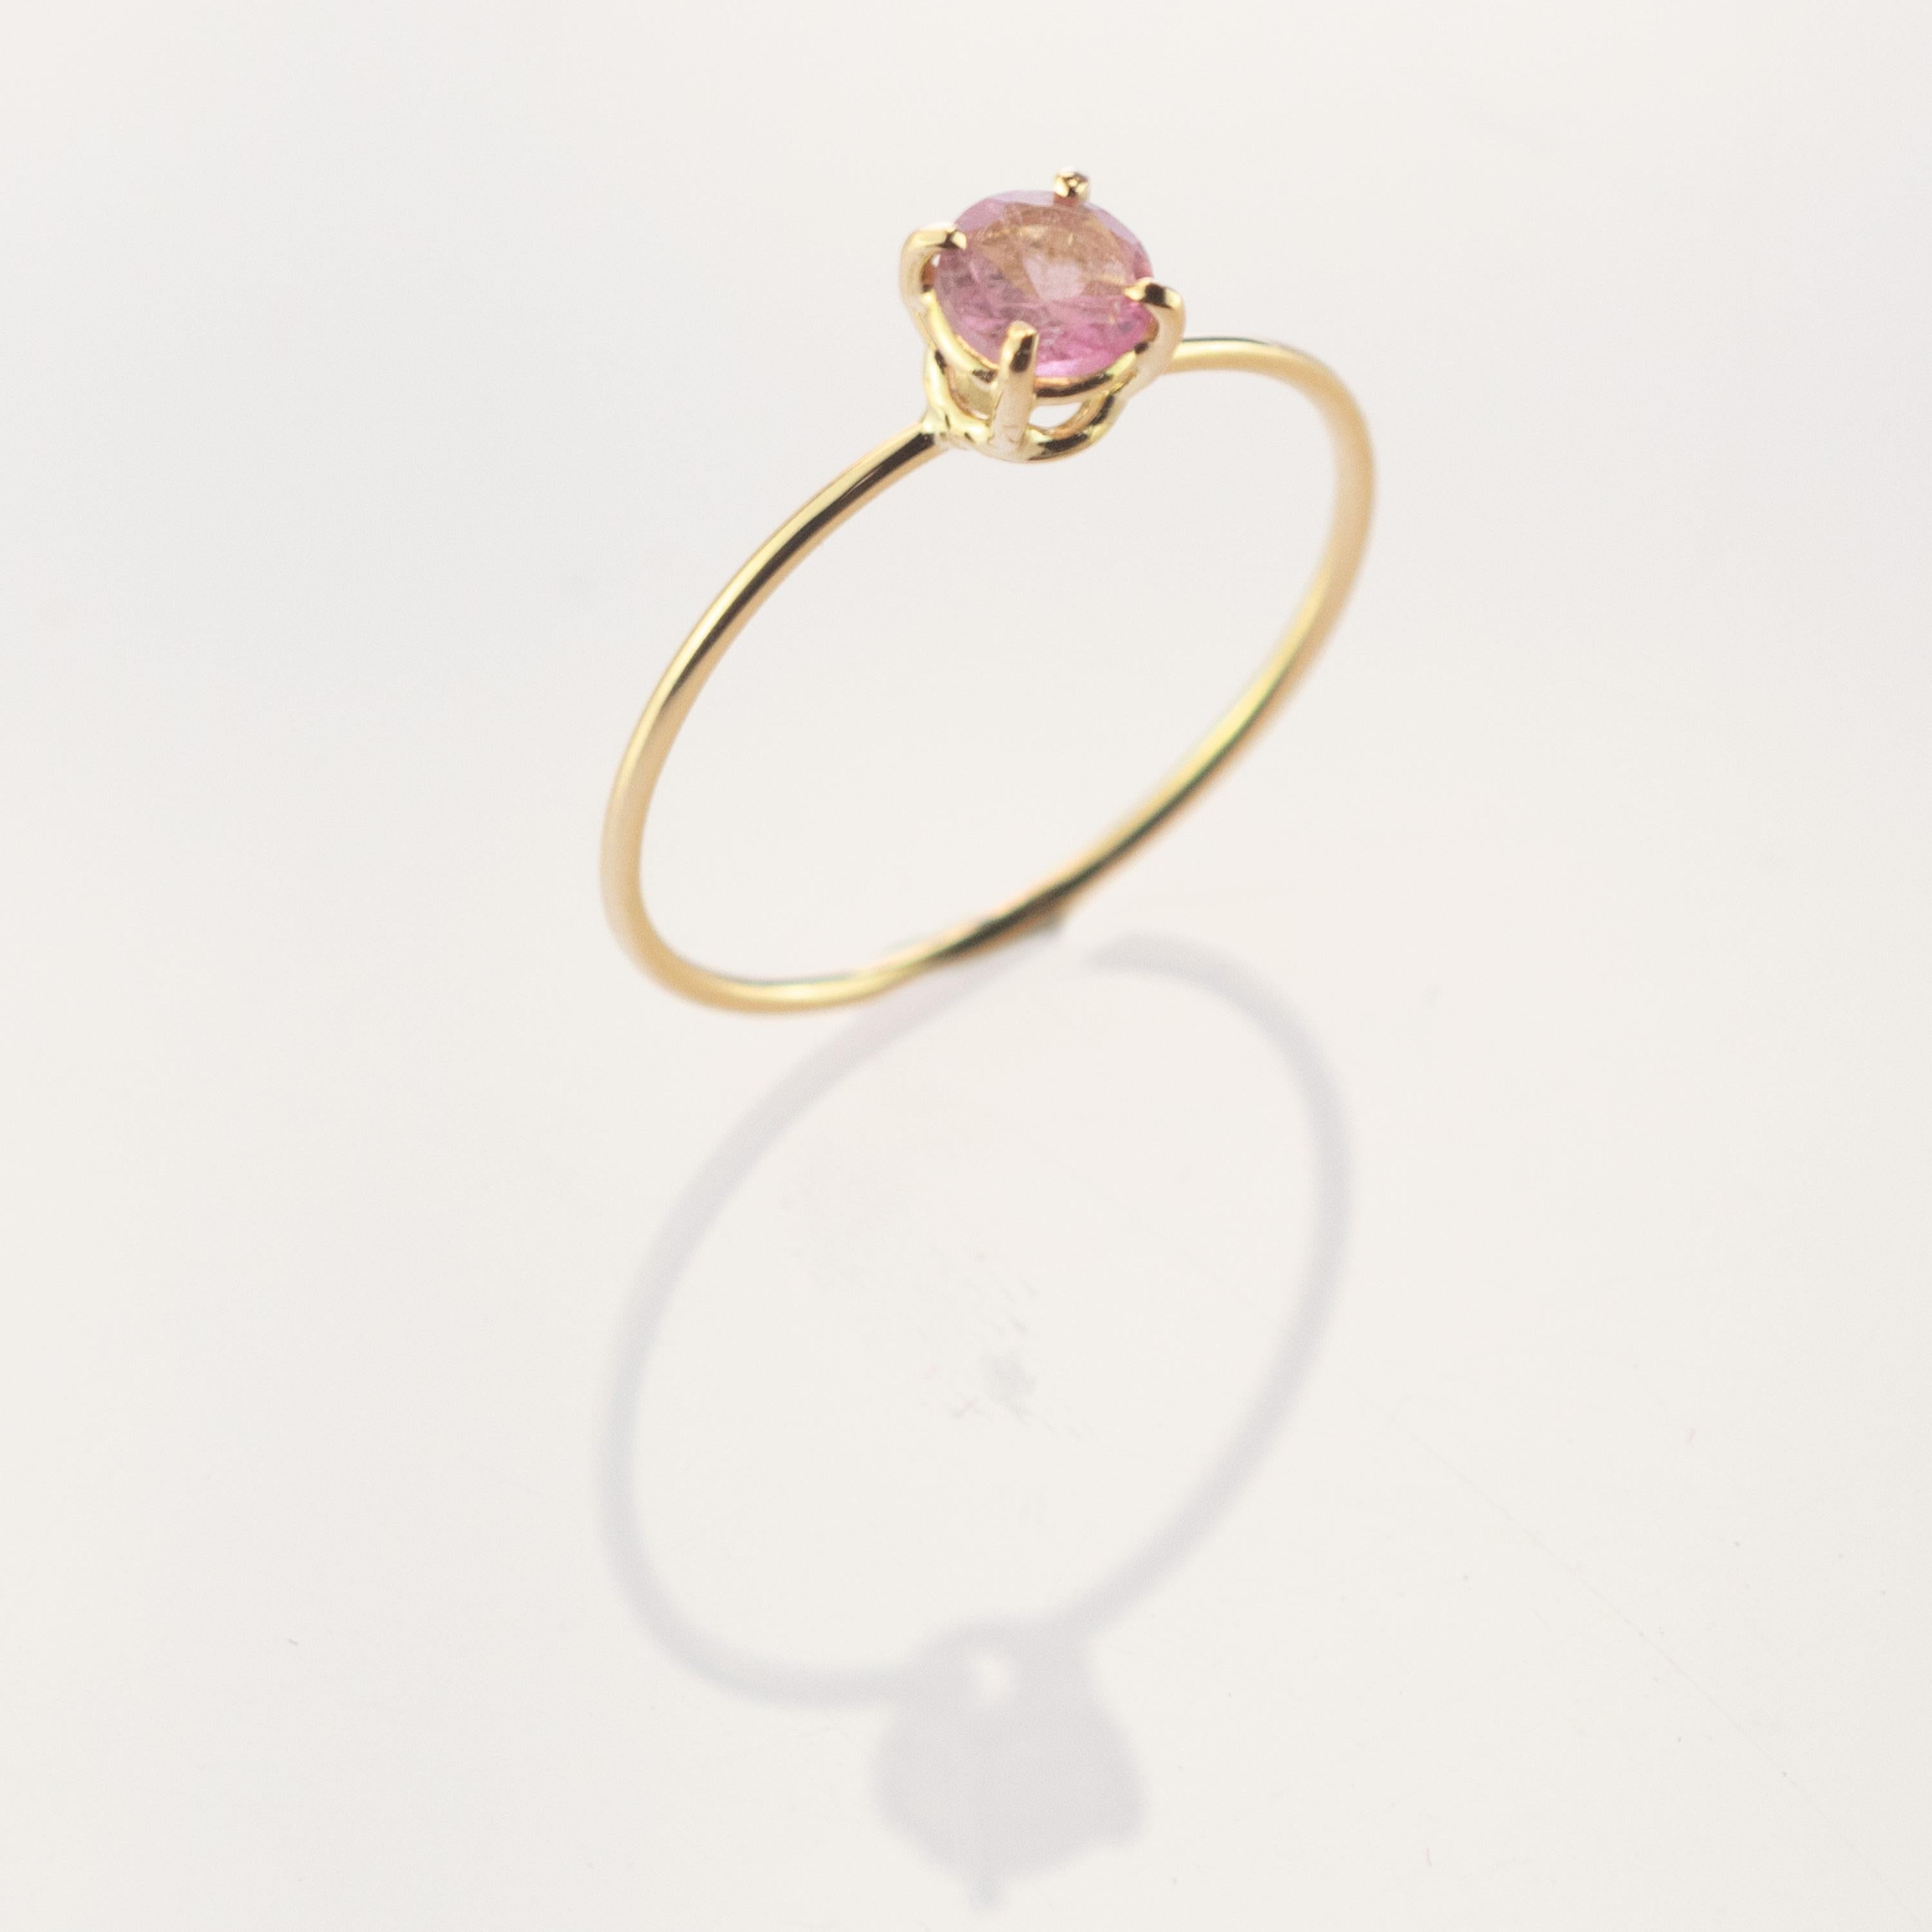 Brilliant Cut Intini Jewels Tourmaline 9 Karat Gold Handmade Delicate Modern Chic Italy Ring For Sale